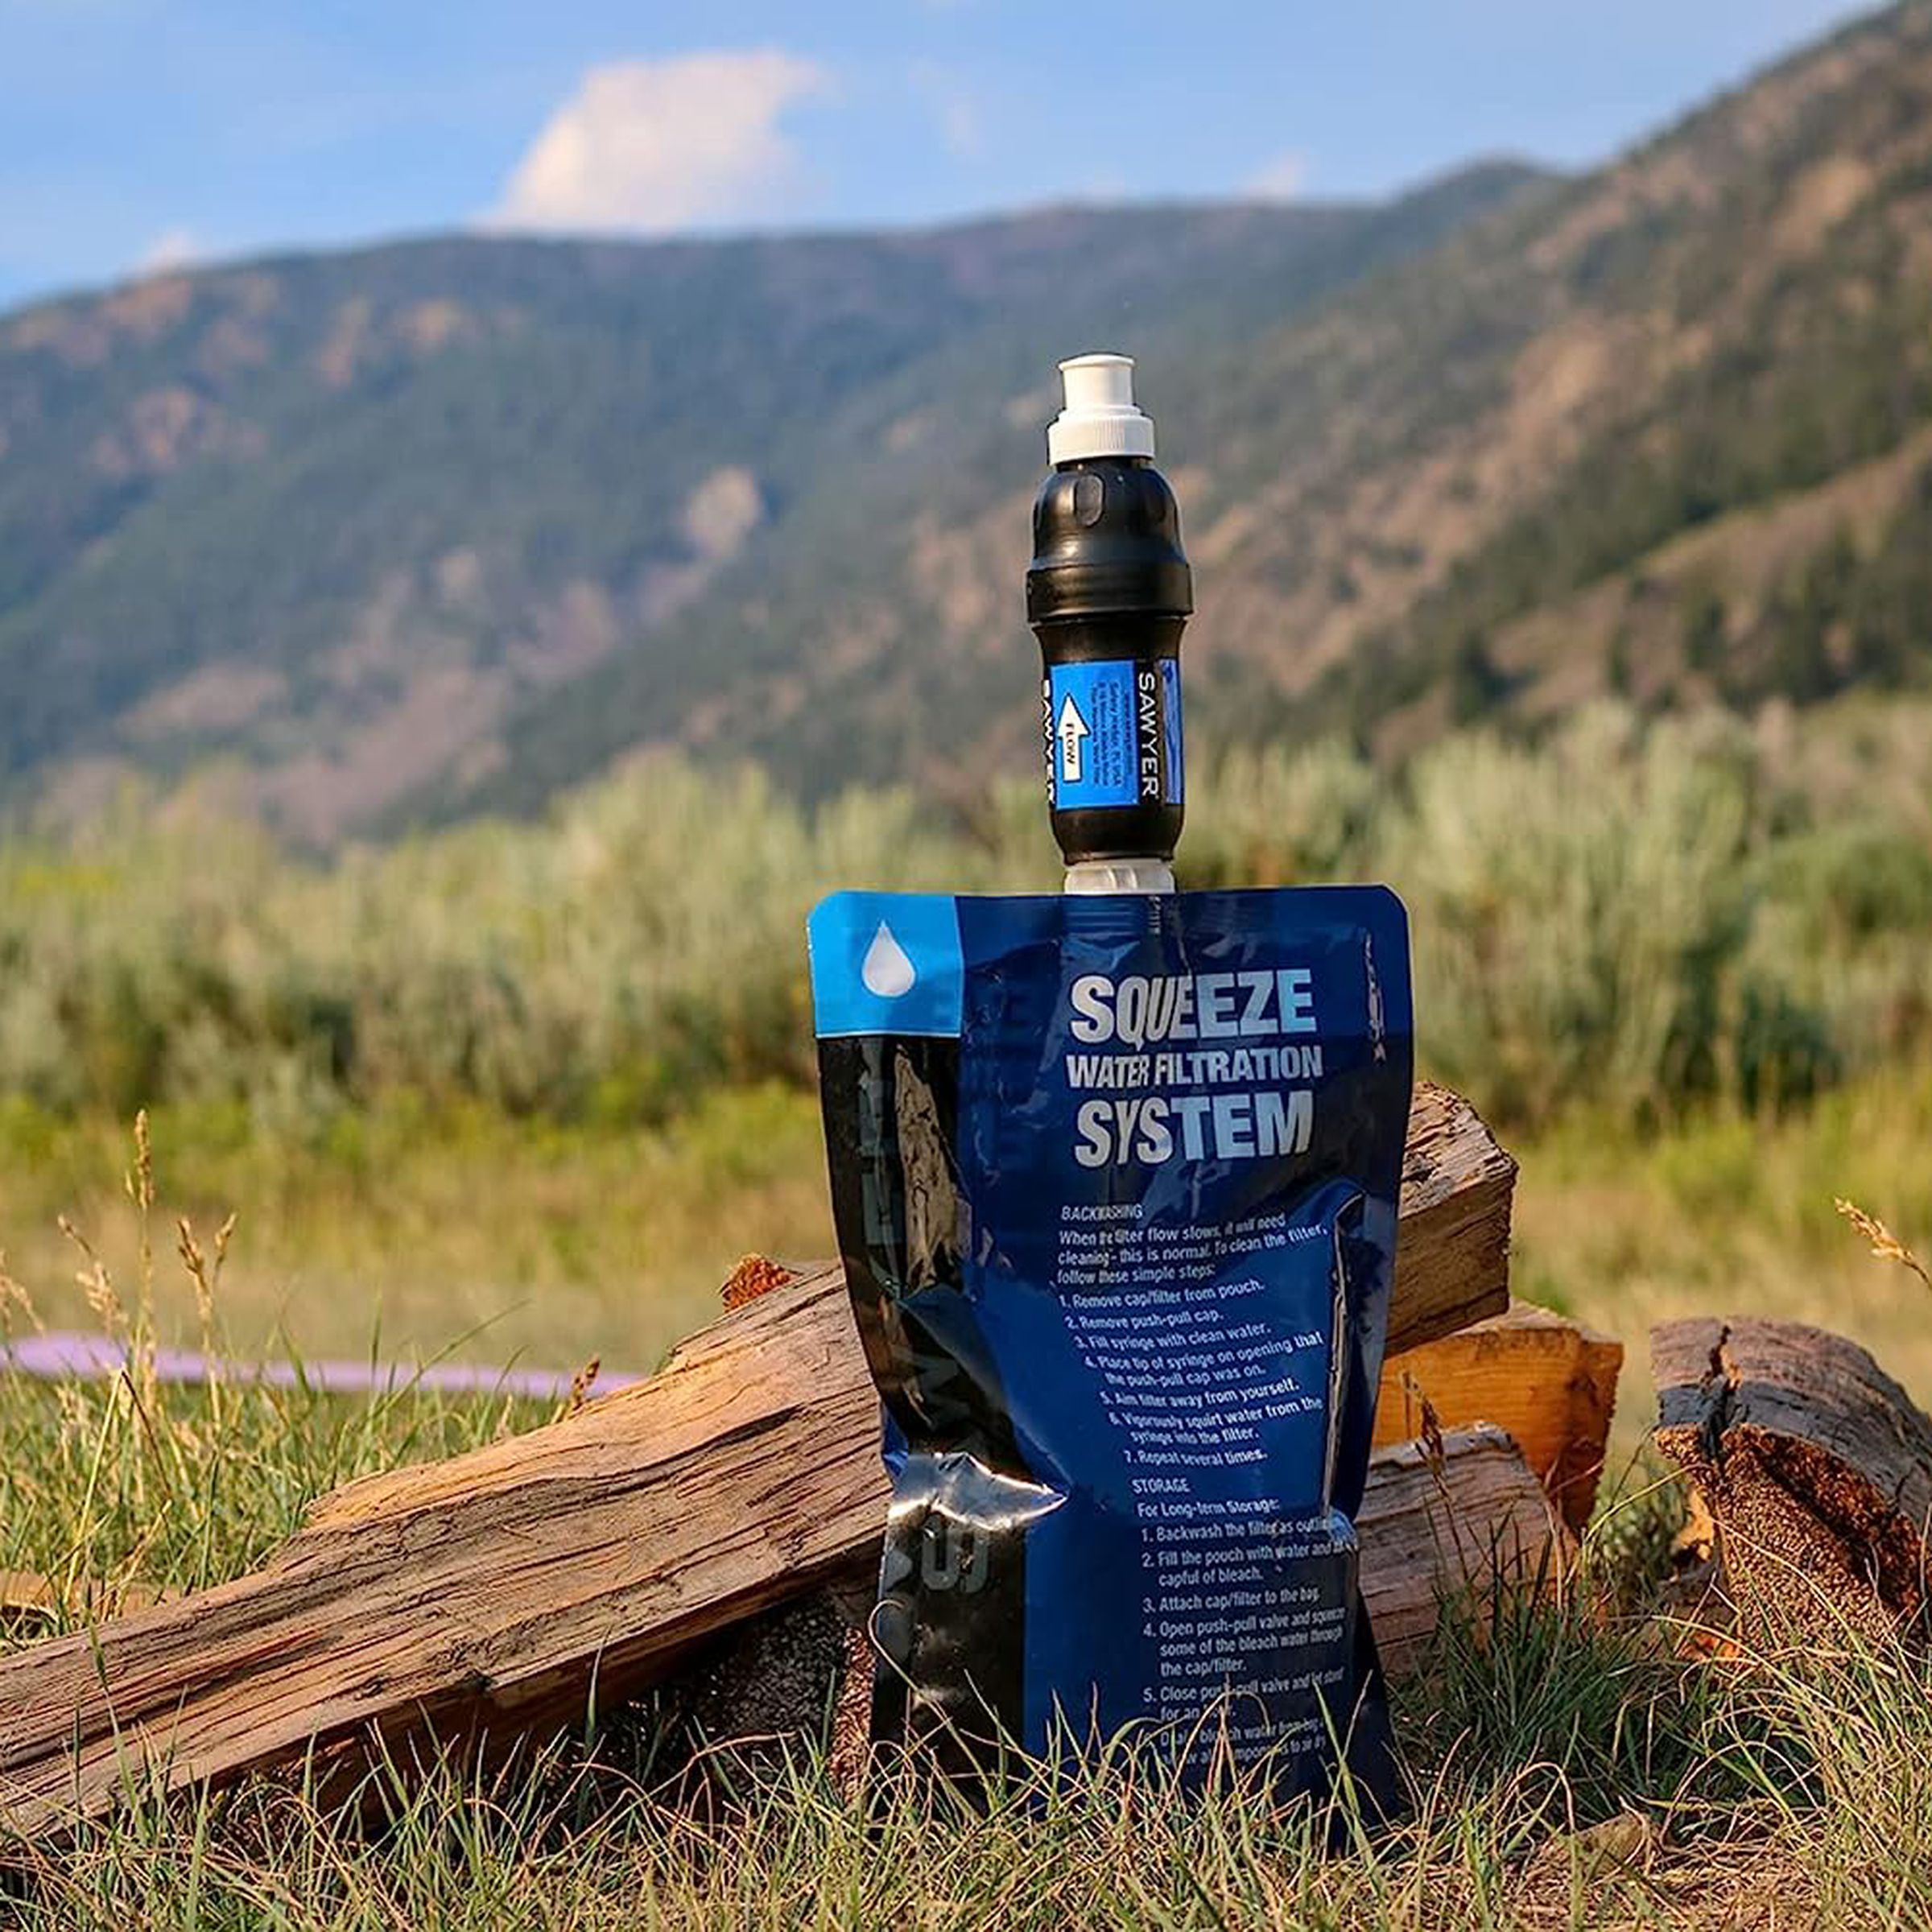 Sawyer squeeze water filtration system against mountain scenery